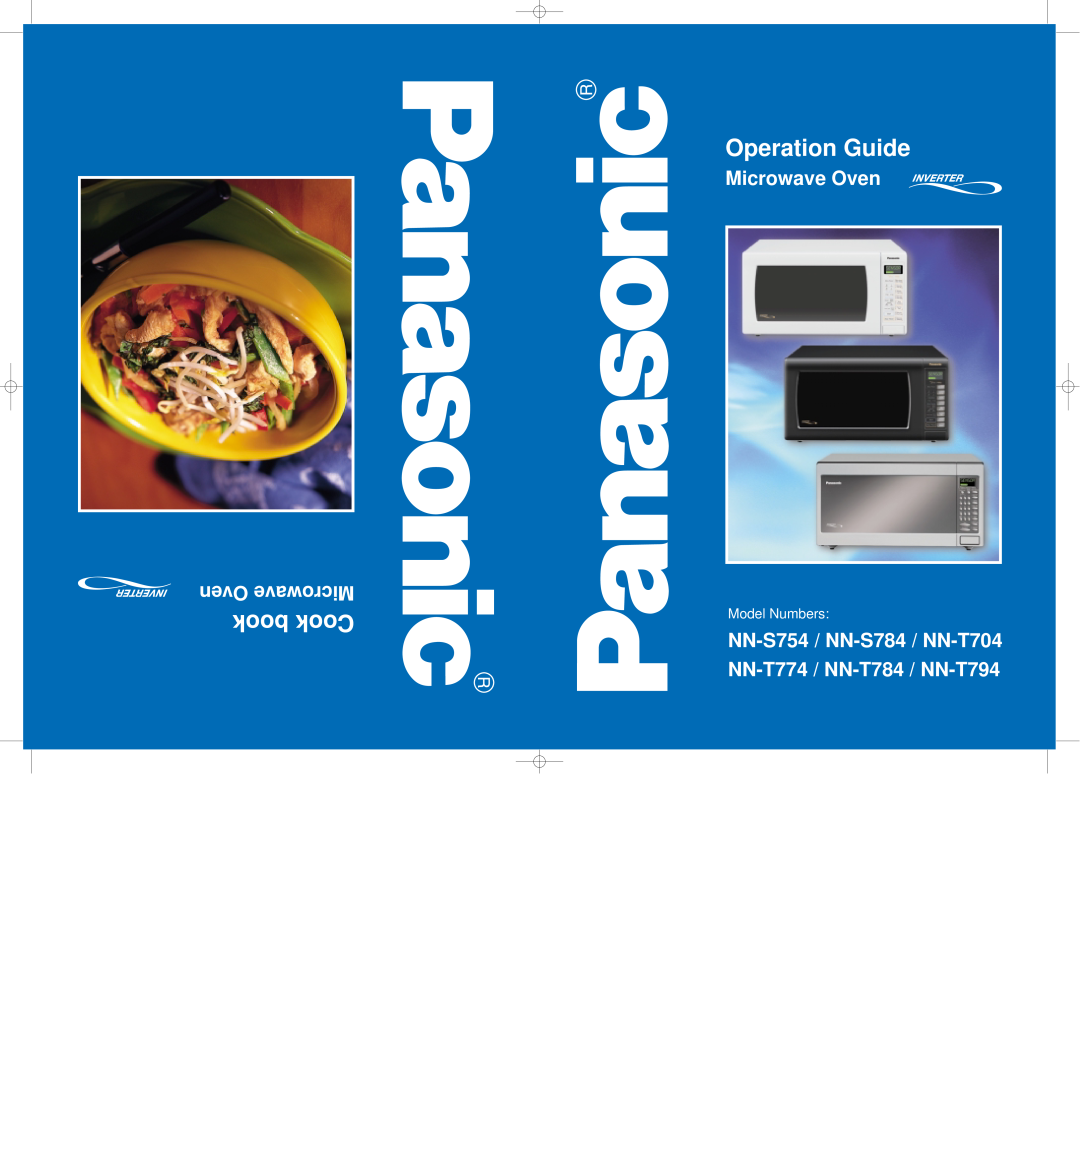 Panasonic NN-S784, NN-T704 manual book Cook, Operation Guide, Oven Microwave, Microwave Oven, Model Numbers 